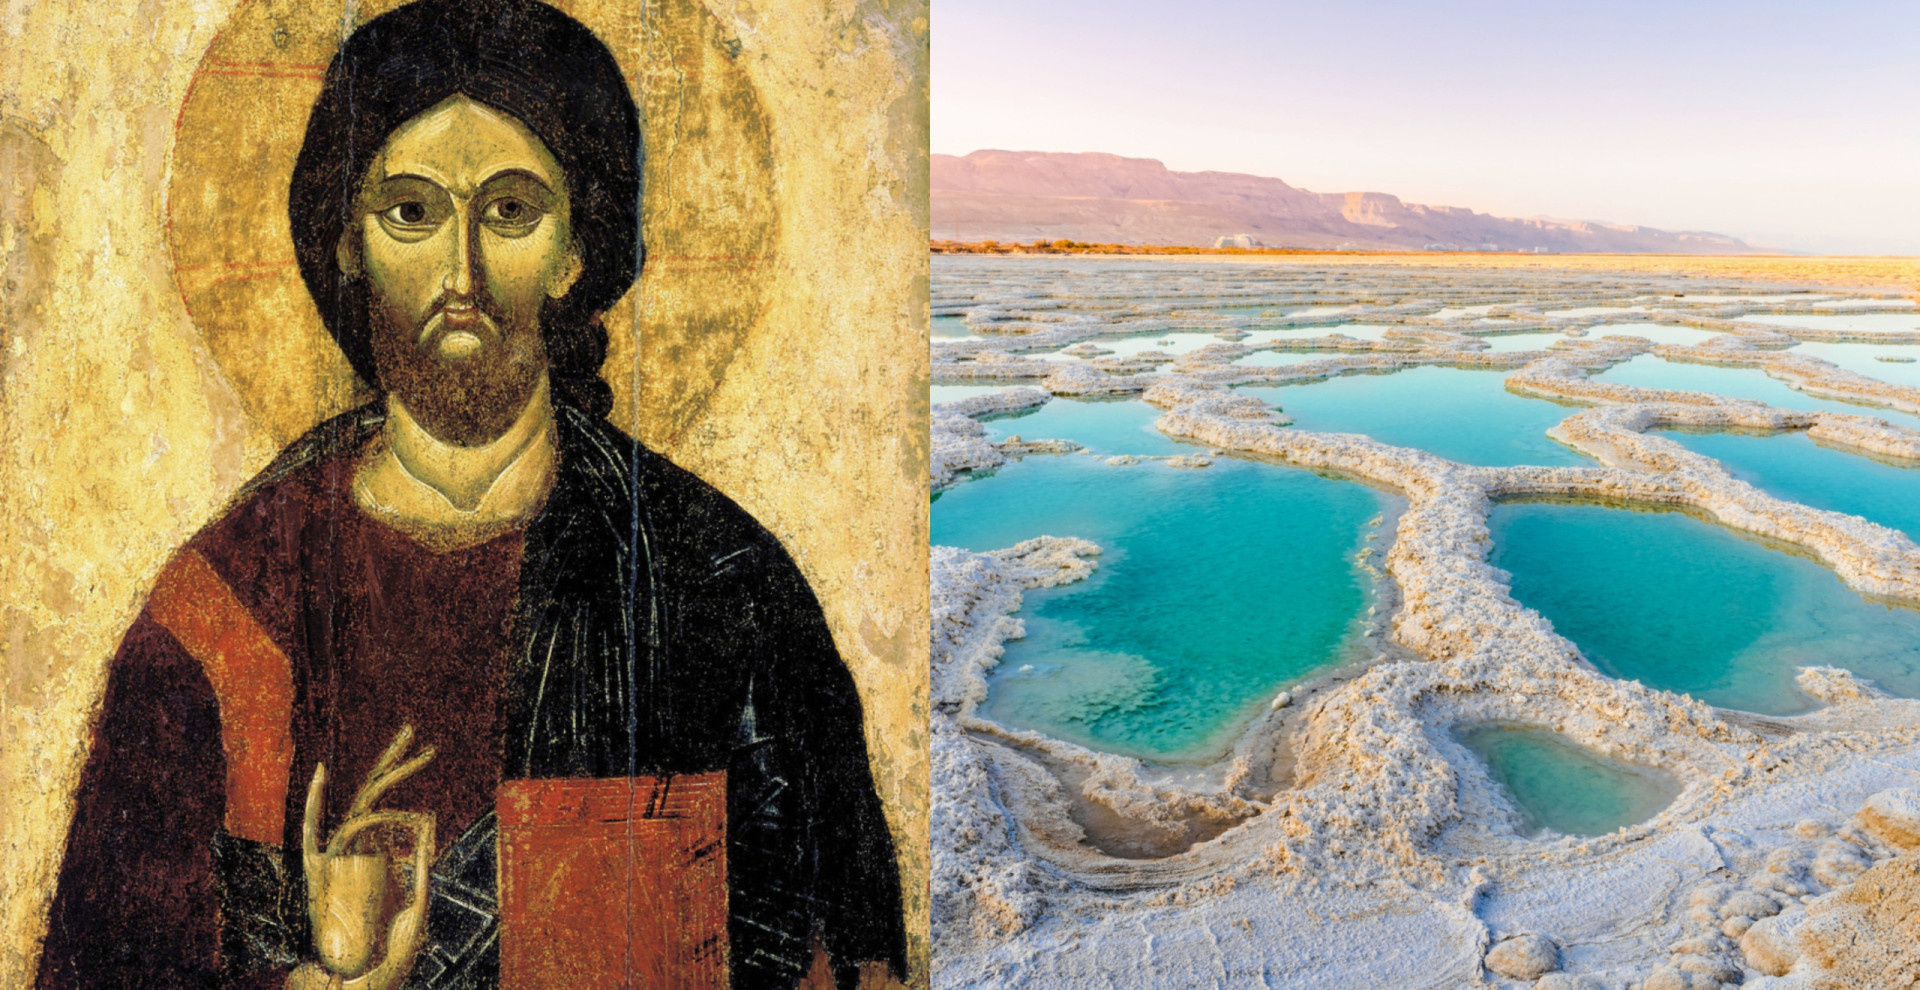 <p>The Dead Sea is one of the world's saltiest bodies of water. Little if nothing can live in such high salinity. Or so scientists thought. The recent discovery of fish and other marine life swimming in Dead Sea sinkholes is baffling researchers. It's also been seen by some as a sign of a biblical prophecy foretold by Ezekiel in the <a href="https://www.starsinsider.com/lifestyle/504170/fulfilled-old-testament-prophecies-about-jesus" rel="noopener">Old Testament</a>. So, is this remarkable revelation proof that one of the most ancient lakes on the planet can sustain life, or is it an ominous portent of impending End-of-Days?</p> <p>Click through and decide what you believe.</p><p>You may also like:<a href="https://www.starsinsider.com/n/103318?utm_source=msn.com&utm_medium=display&utm_campaign=referral_description&utm_content=573453v1en-us"> Celebrities who've been caught cheating</a></p>